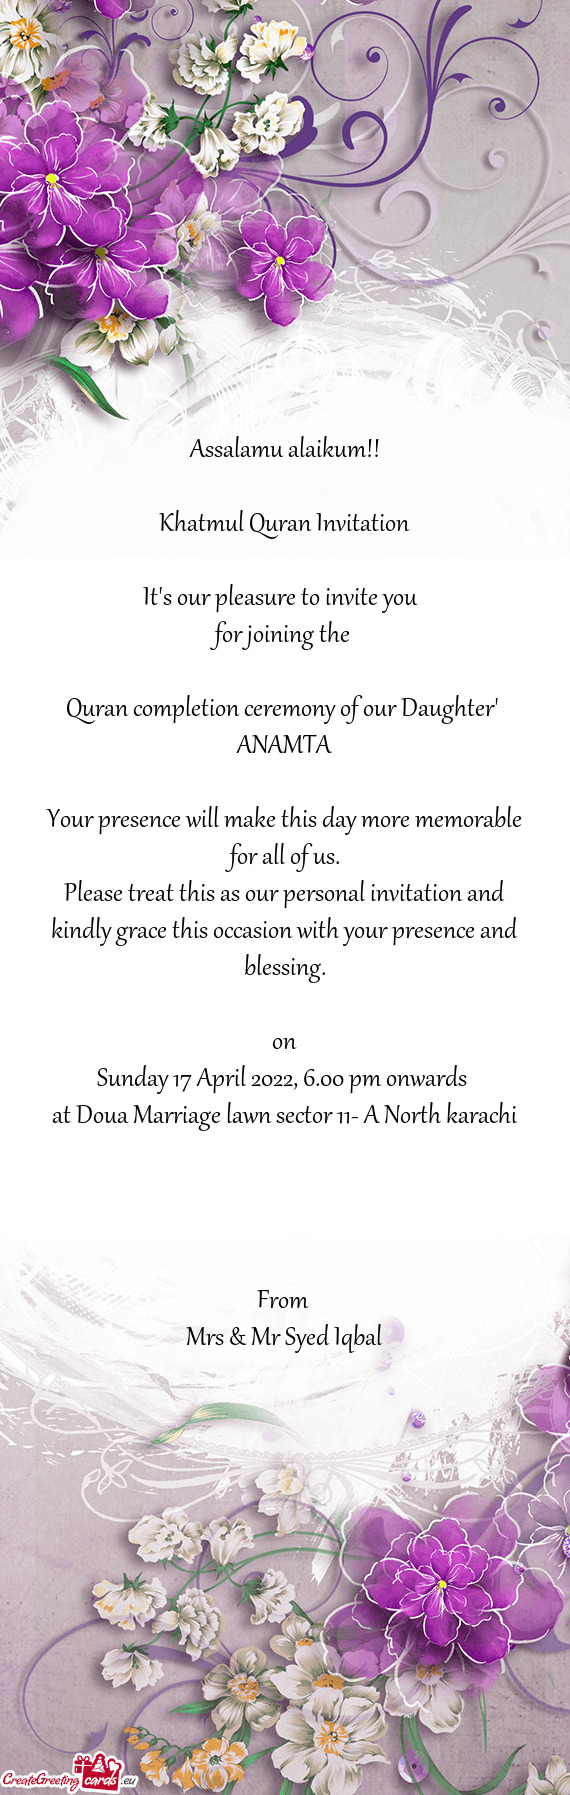 Quran completion ceremony of our Daughter